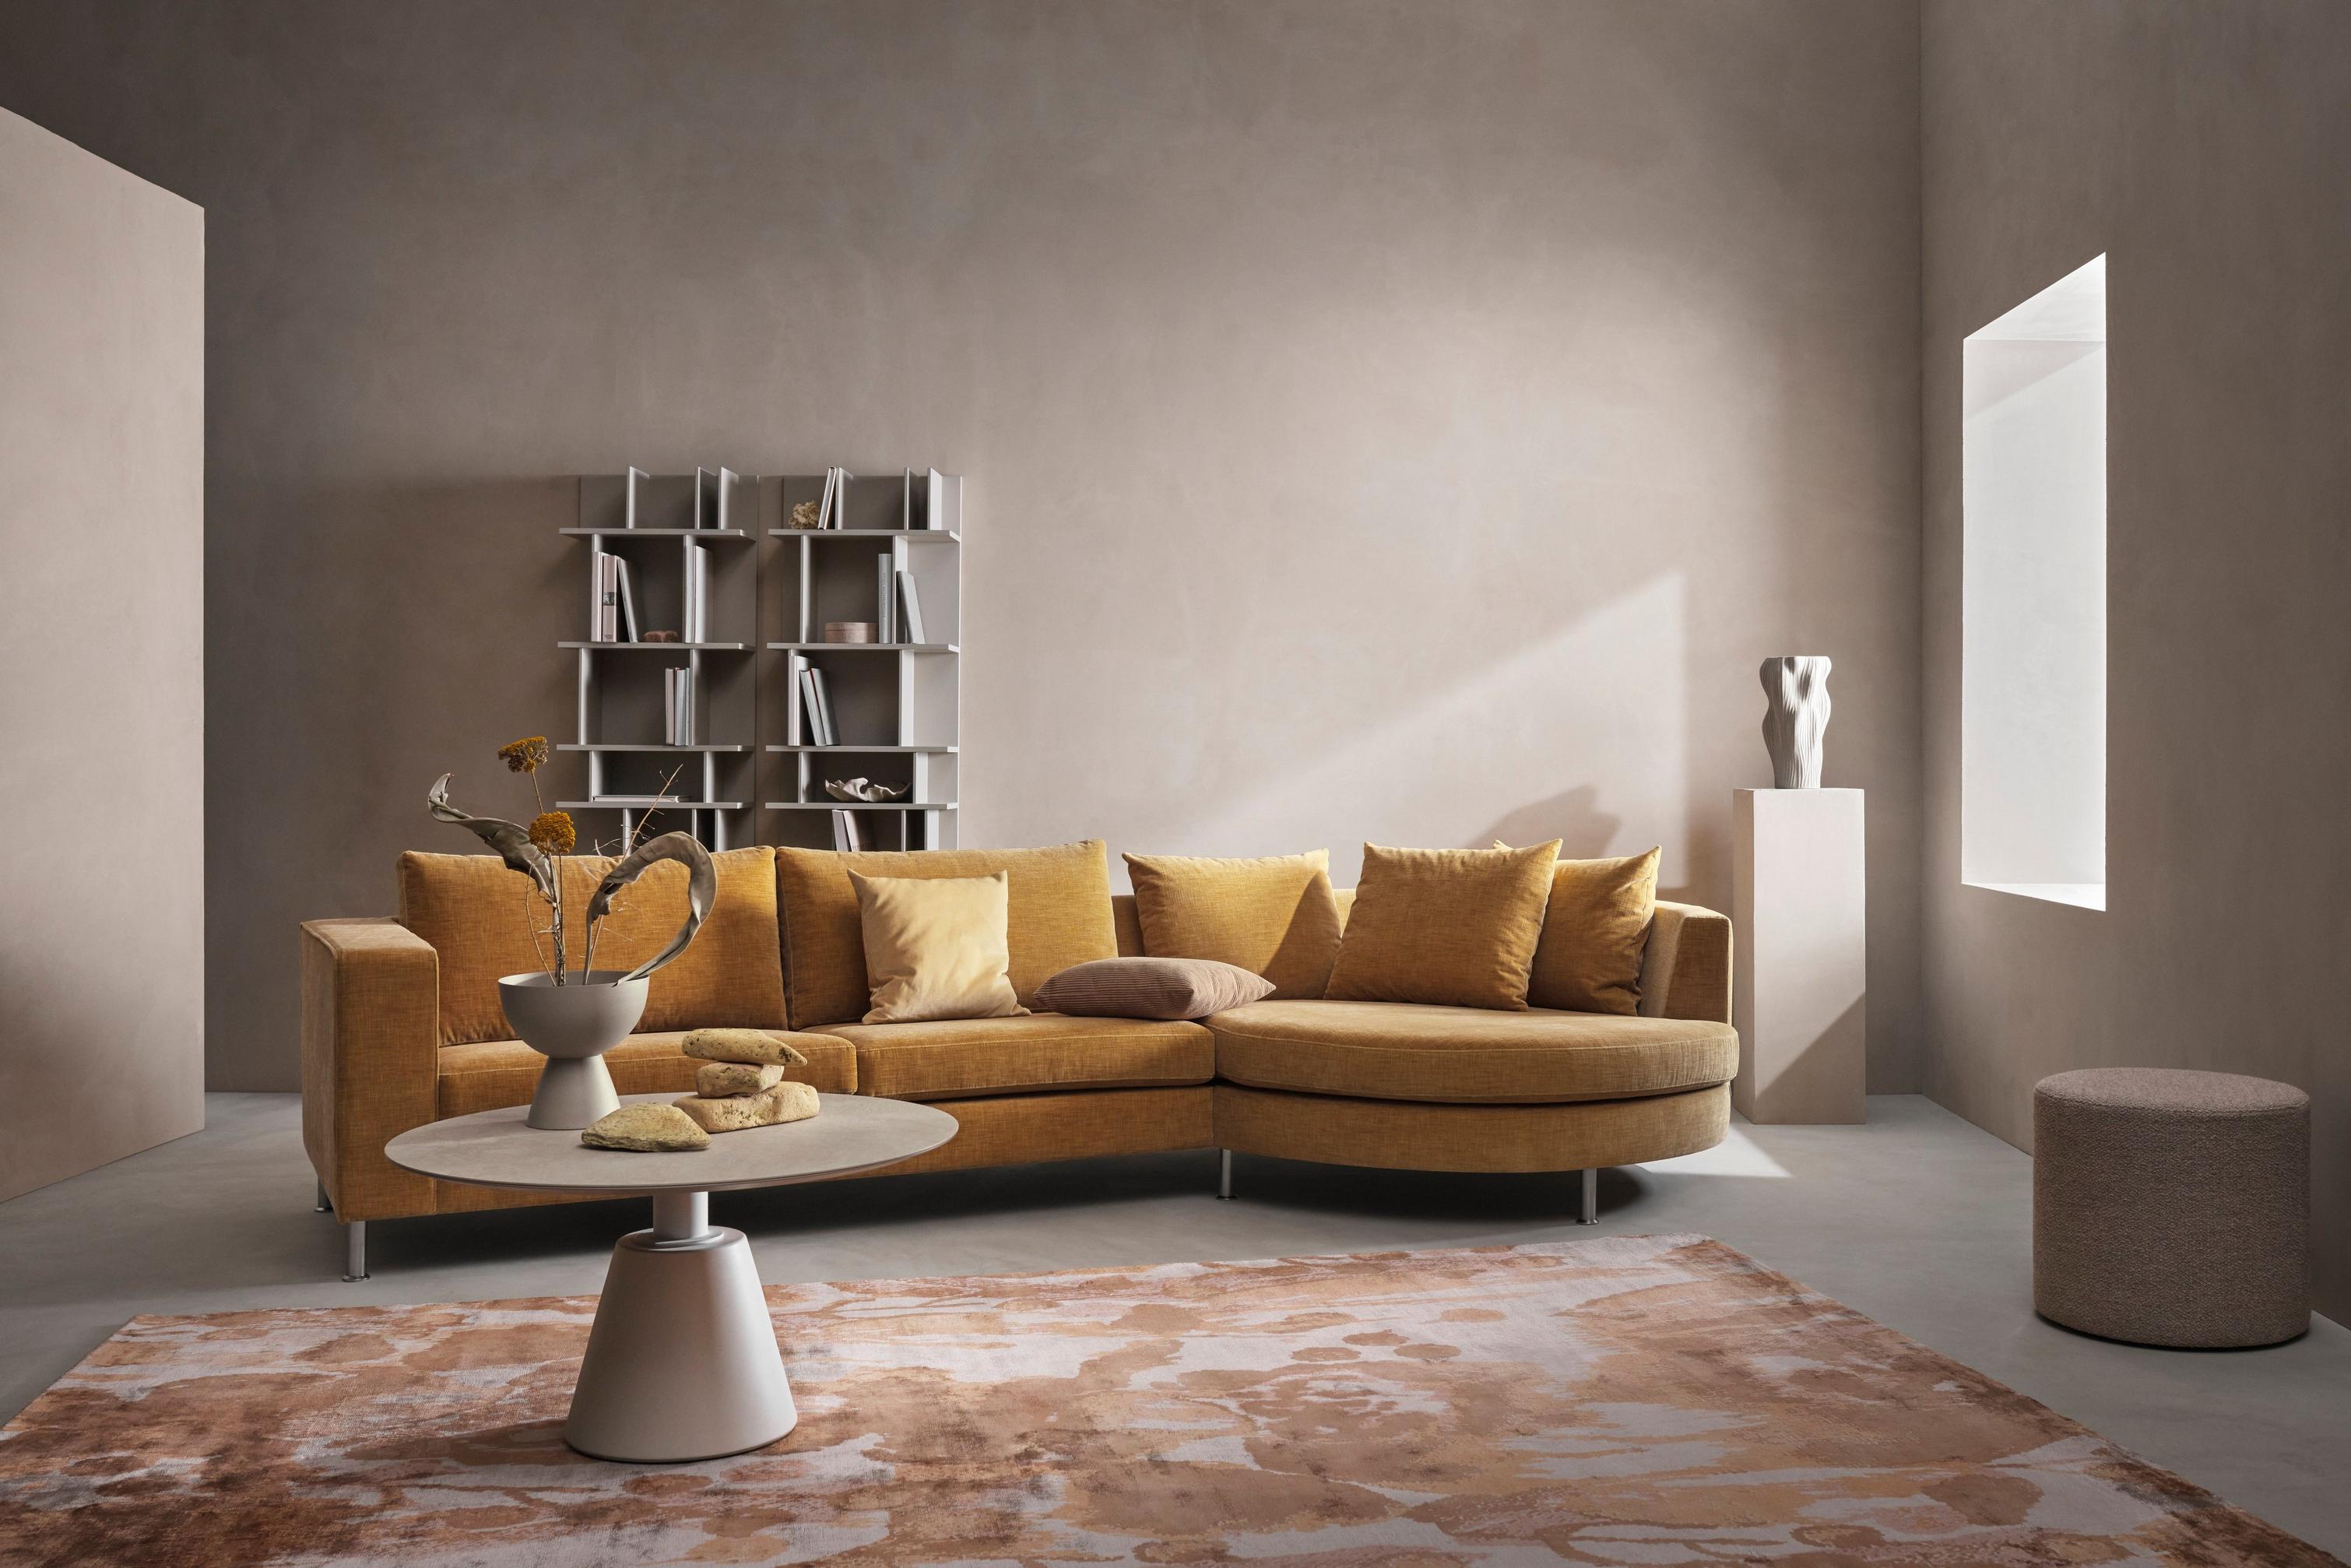 The Indivi sofa with a round resting unit in golden beige Napoli fabric alongside the Eden foot stool with the Madrid coffee table.